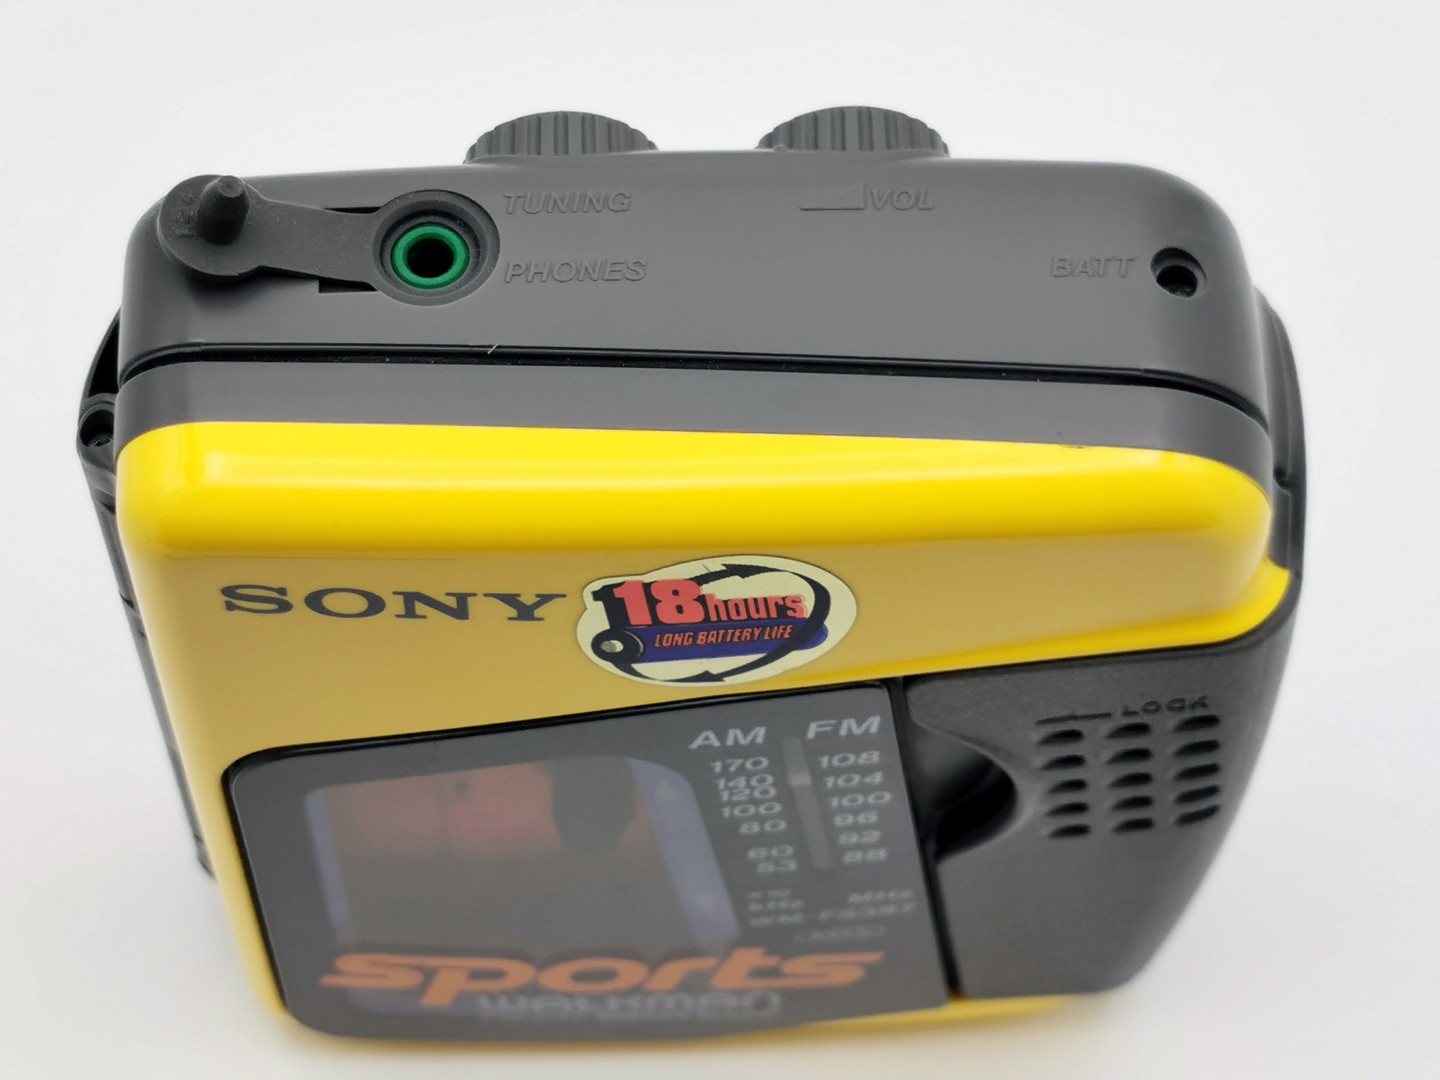 Sony_WM-FS397_-_Top_front_angled_with_headphone_jack_cover_open_ig-boxedwalkman